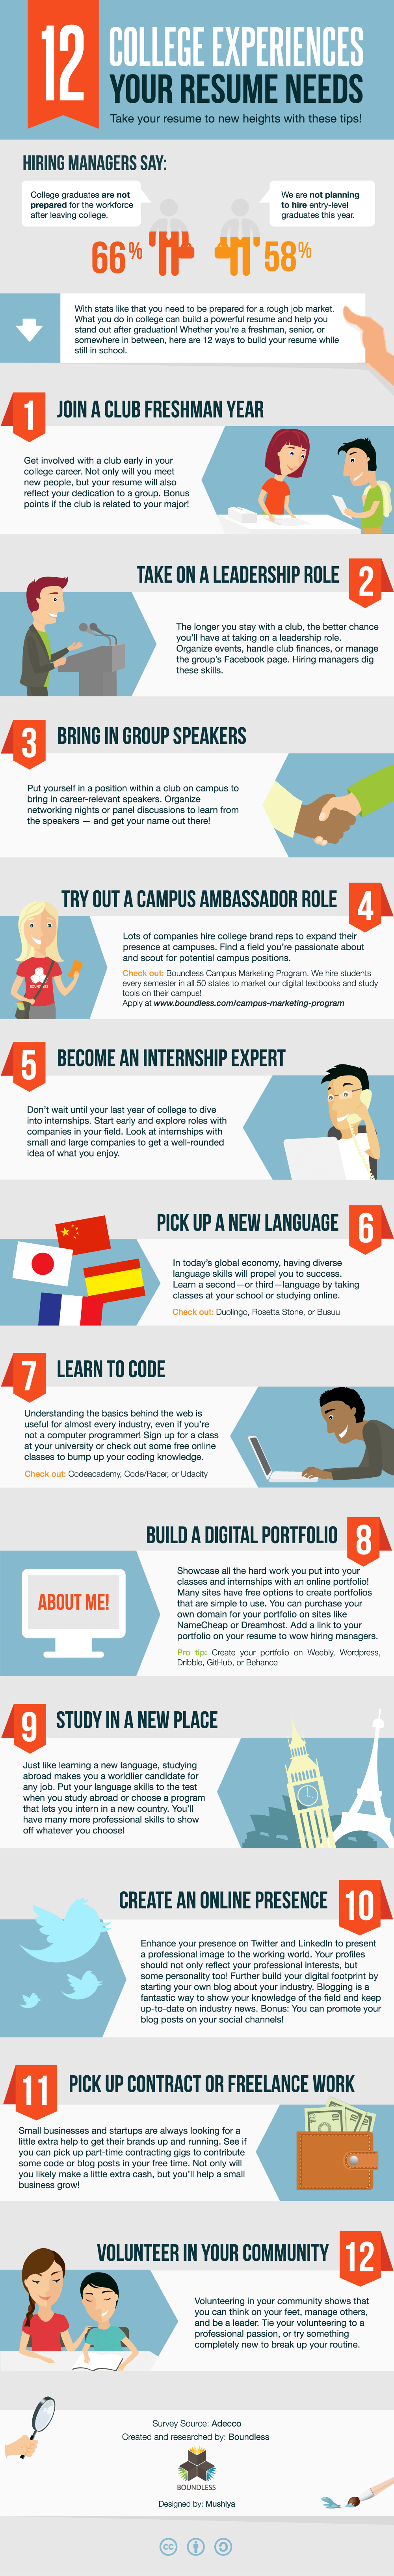 12 Ways to Build your Resume in College Infographic